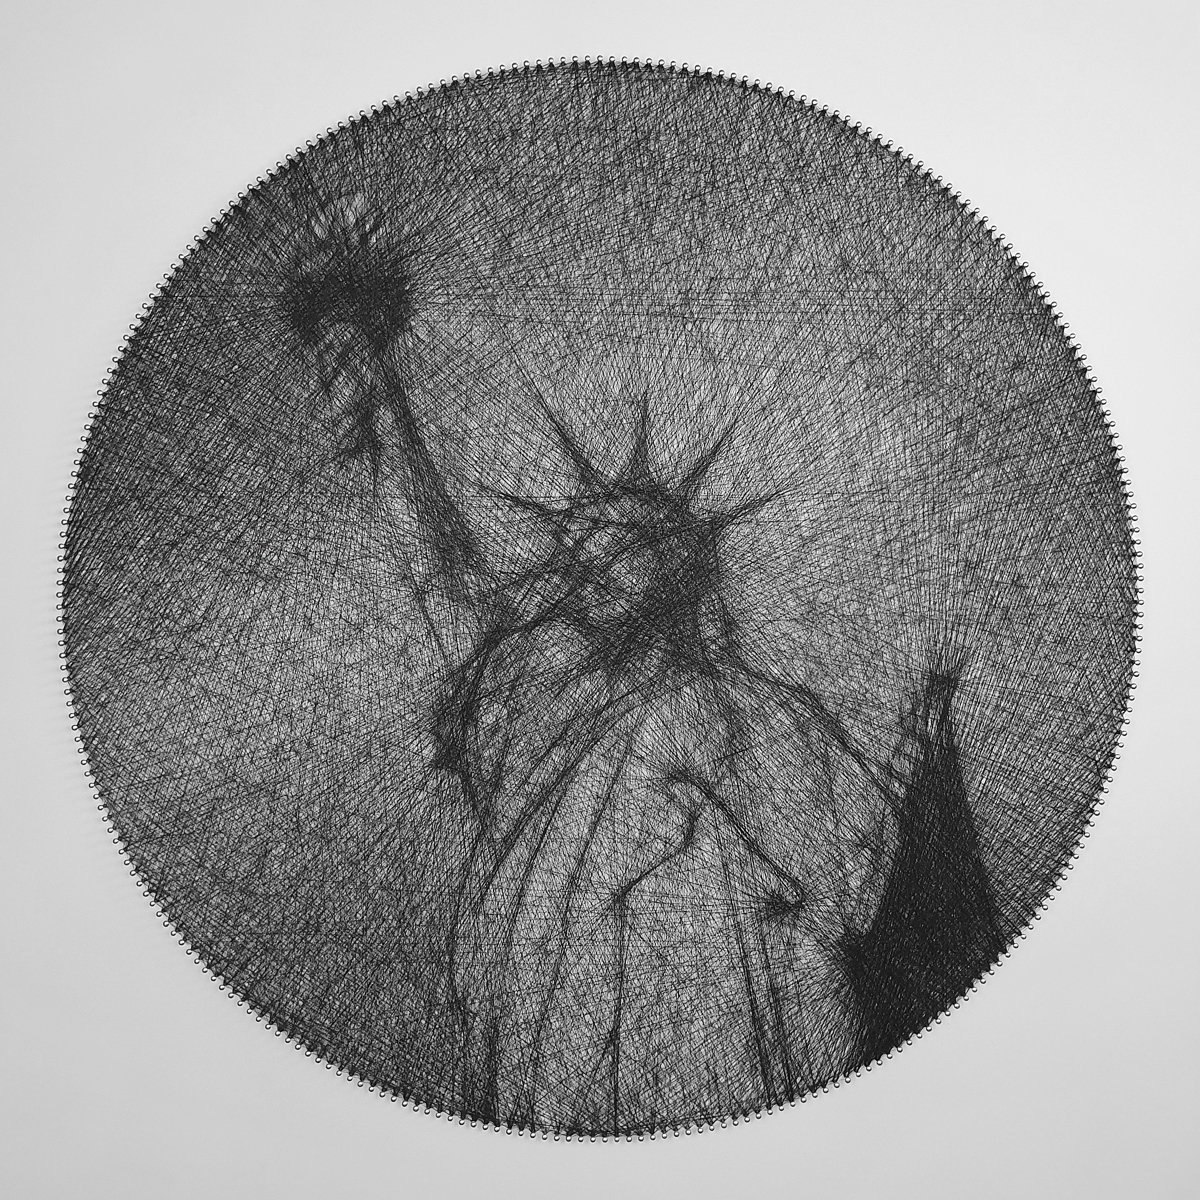 Statue of Liberty String Artwork by Andrey Saharov